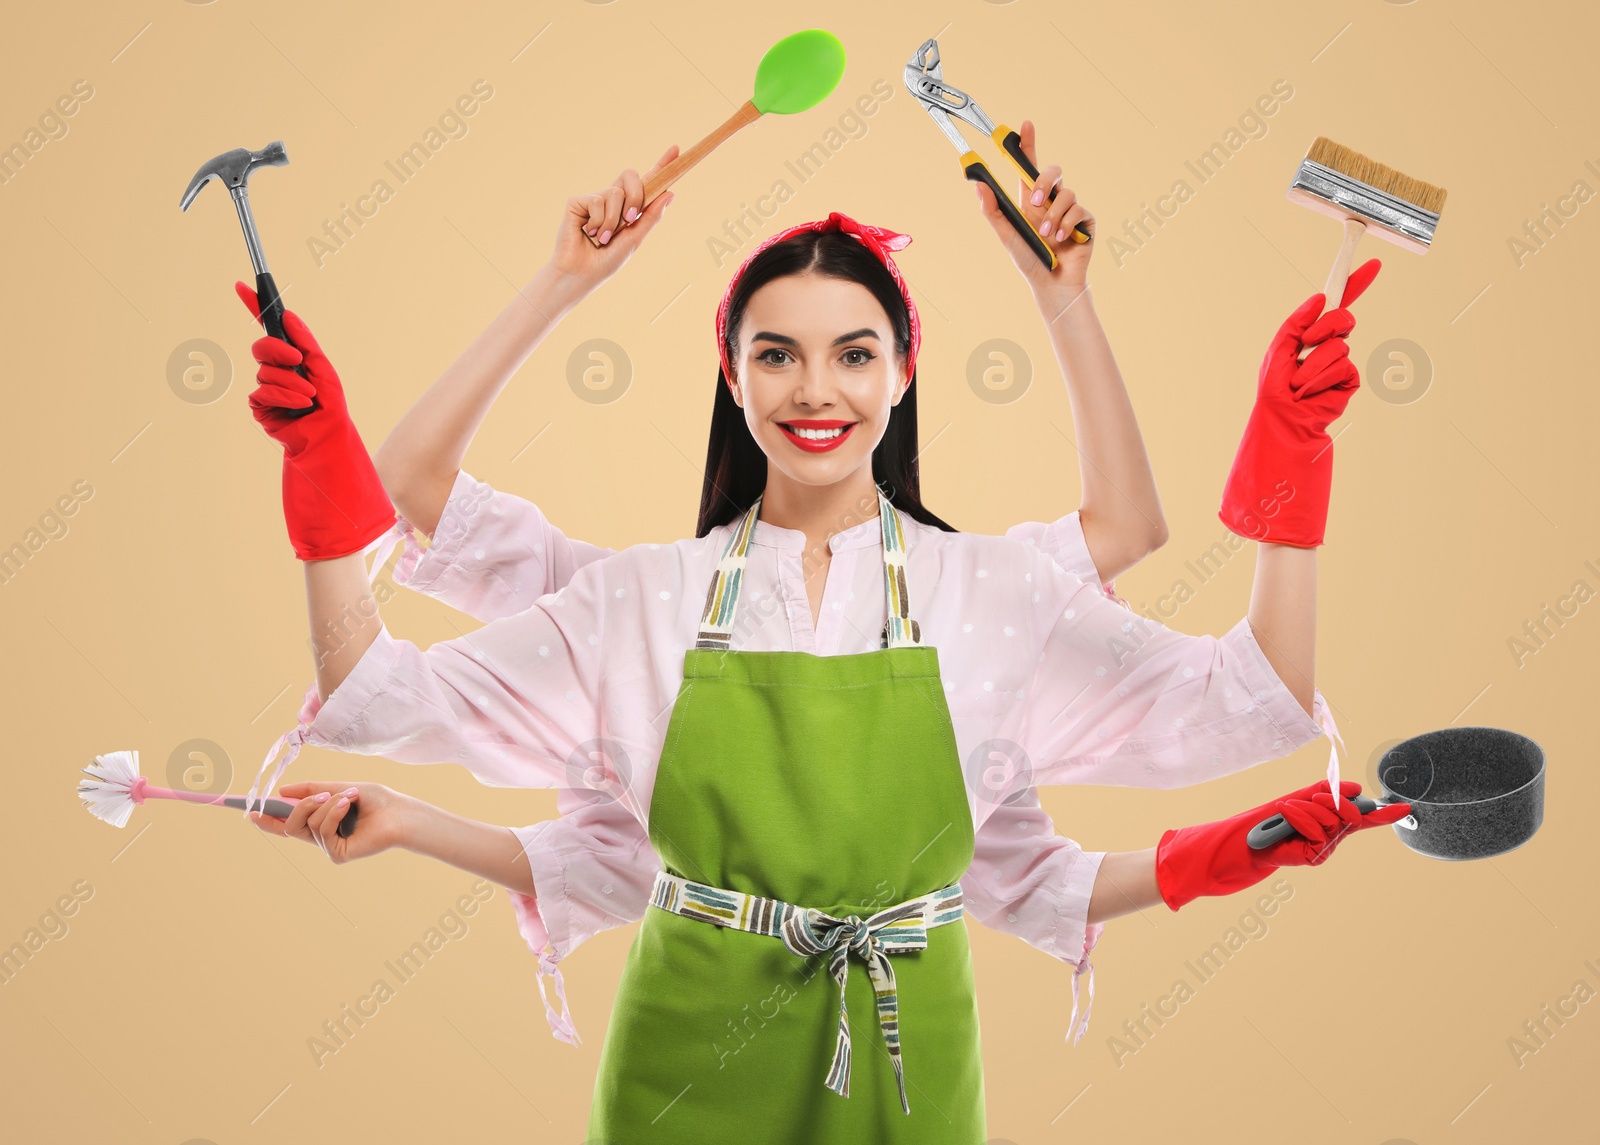 Image of Multitask housewife with many hands holding different stuff on beige background